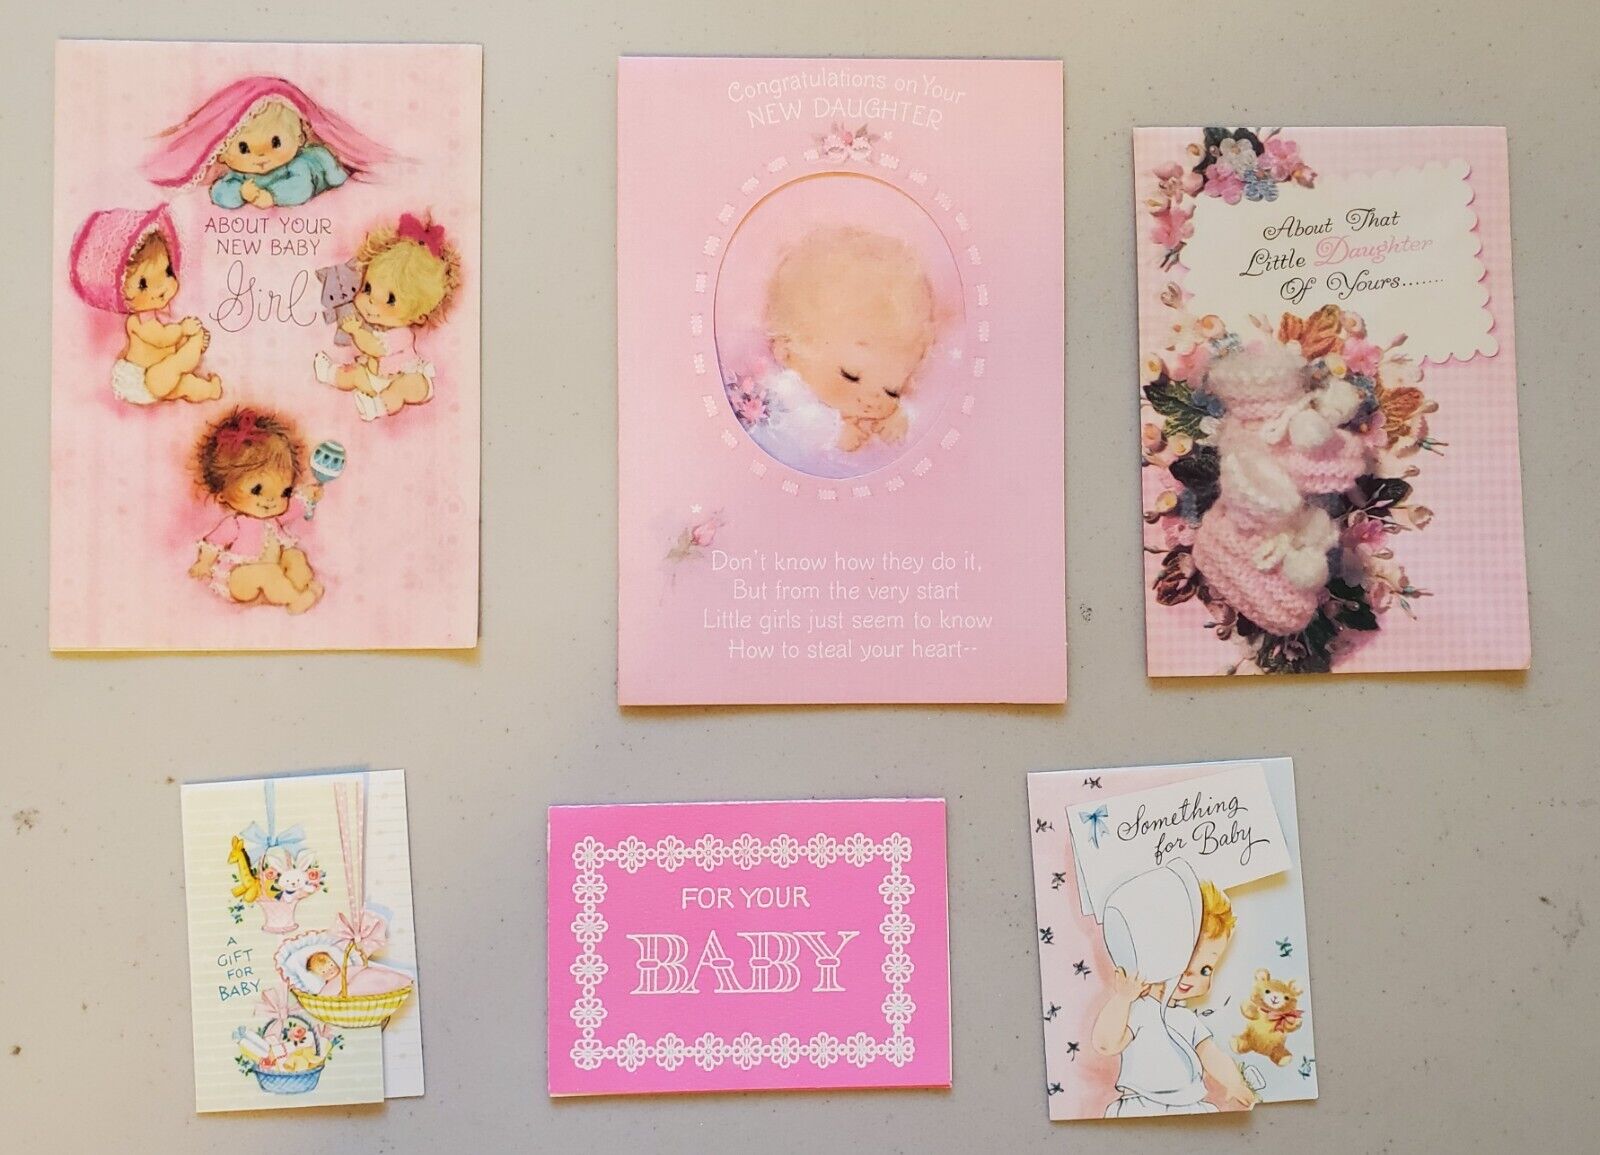 Lot of 18 vintage baby girl cards - early 1970s